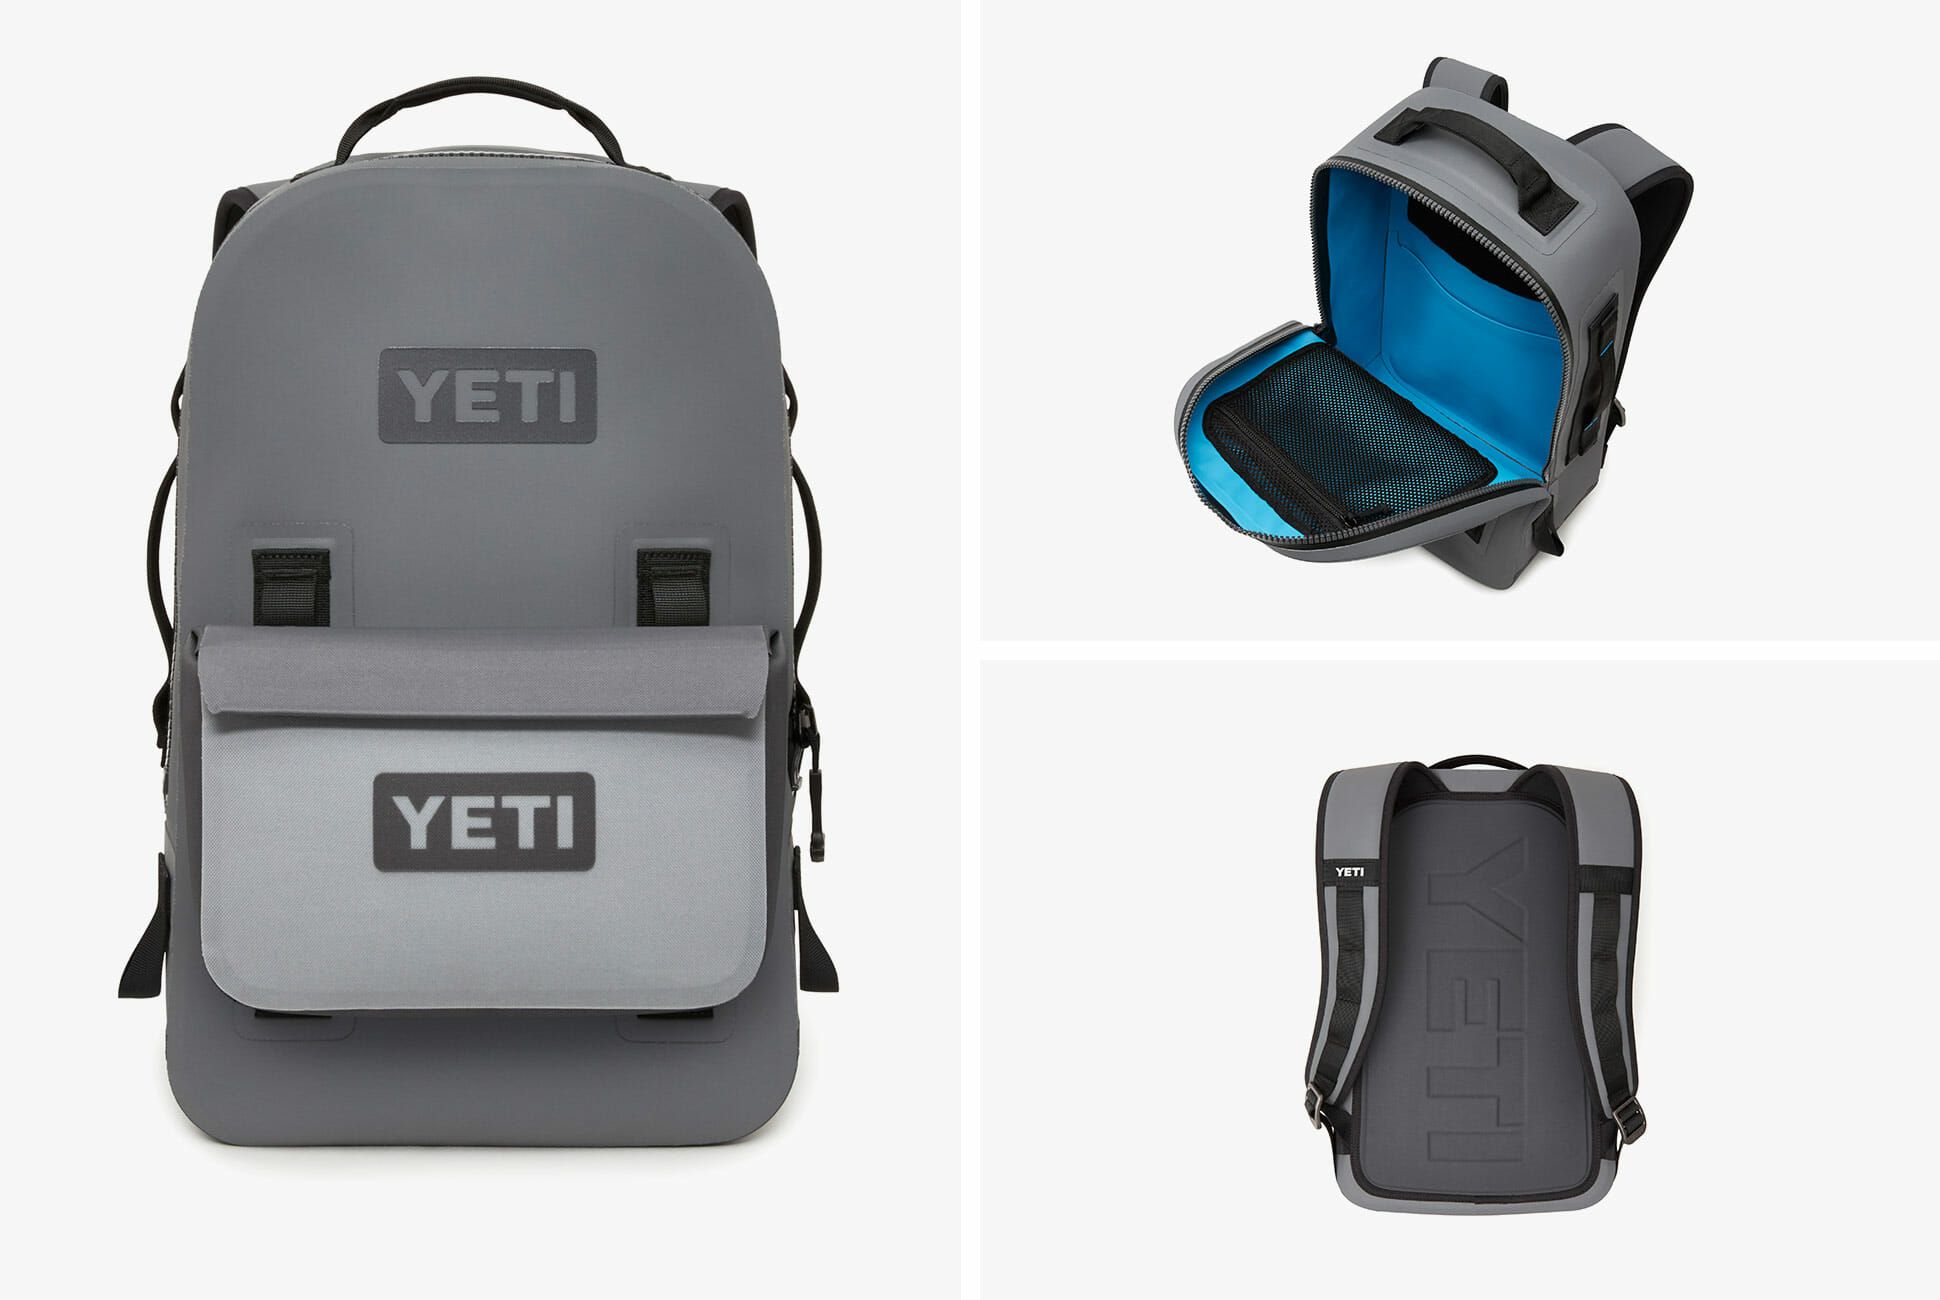 Yeti's New Panga Backpack Is The Durable Luggage We've Been Waiting For